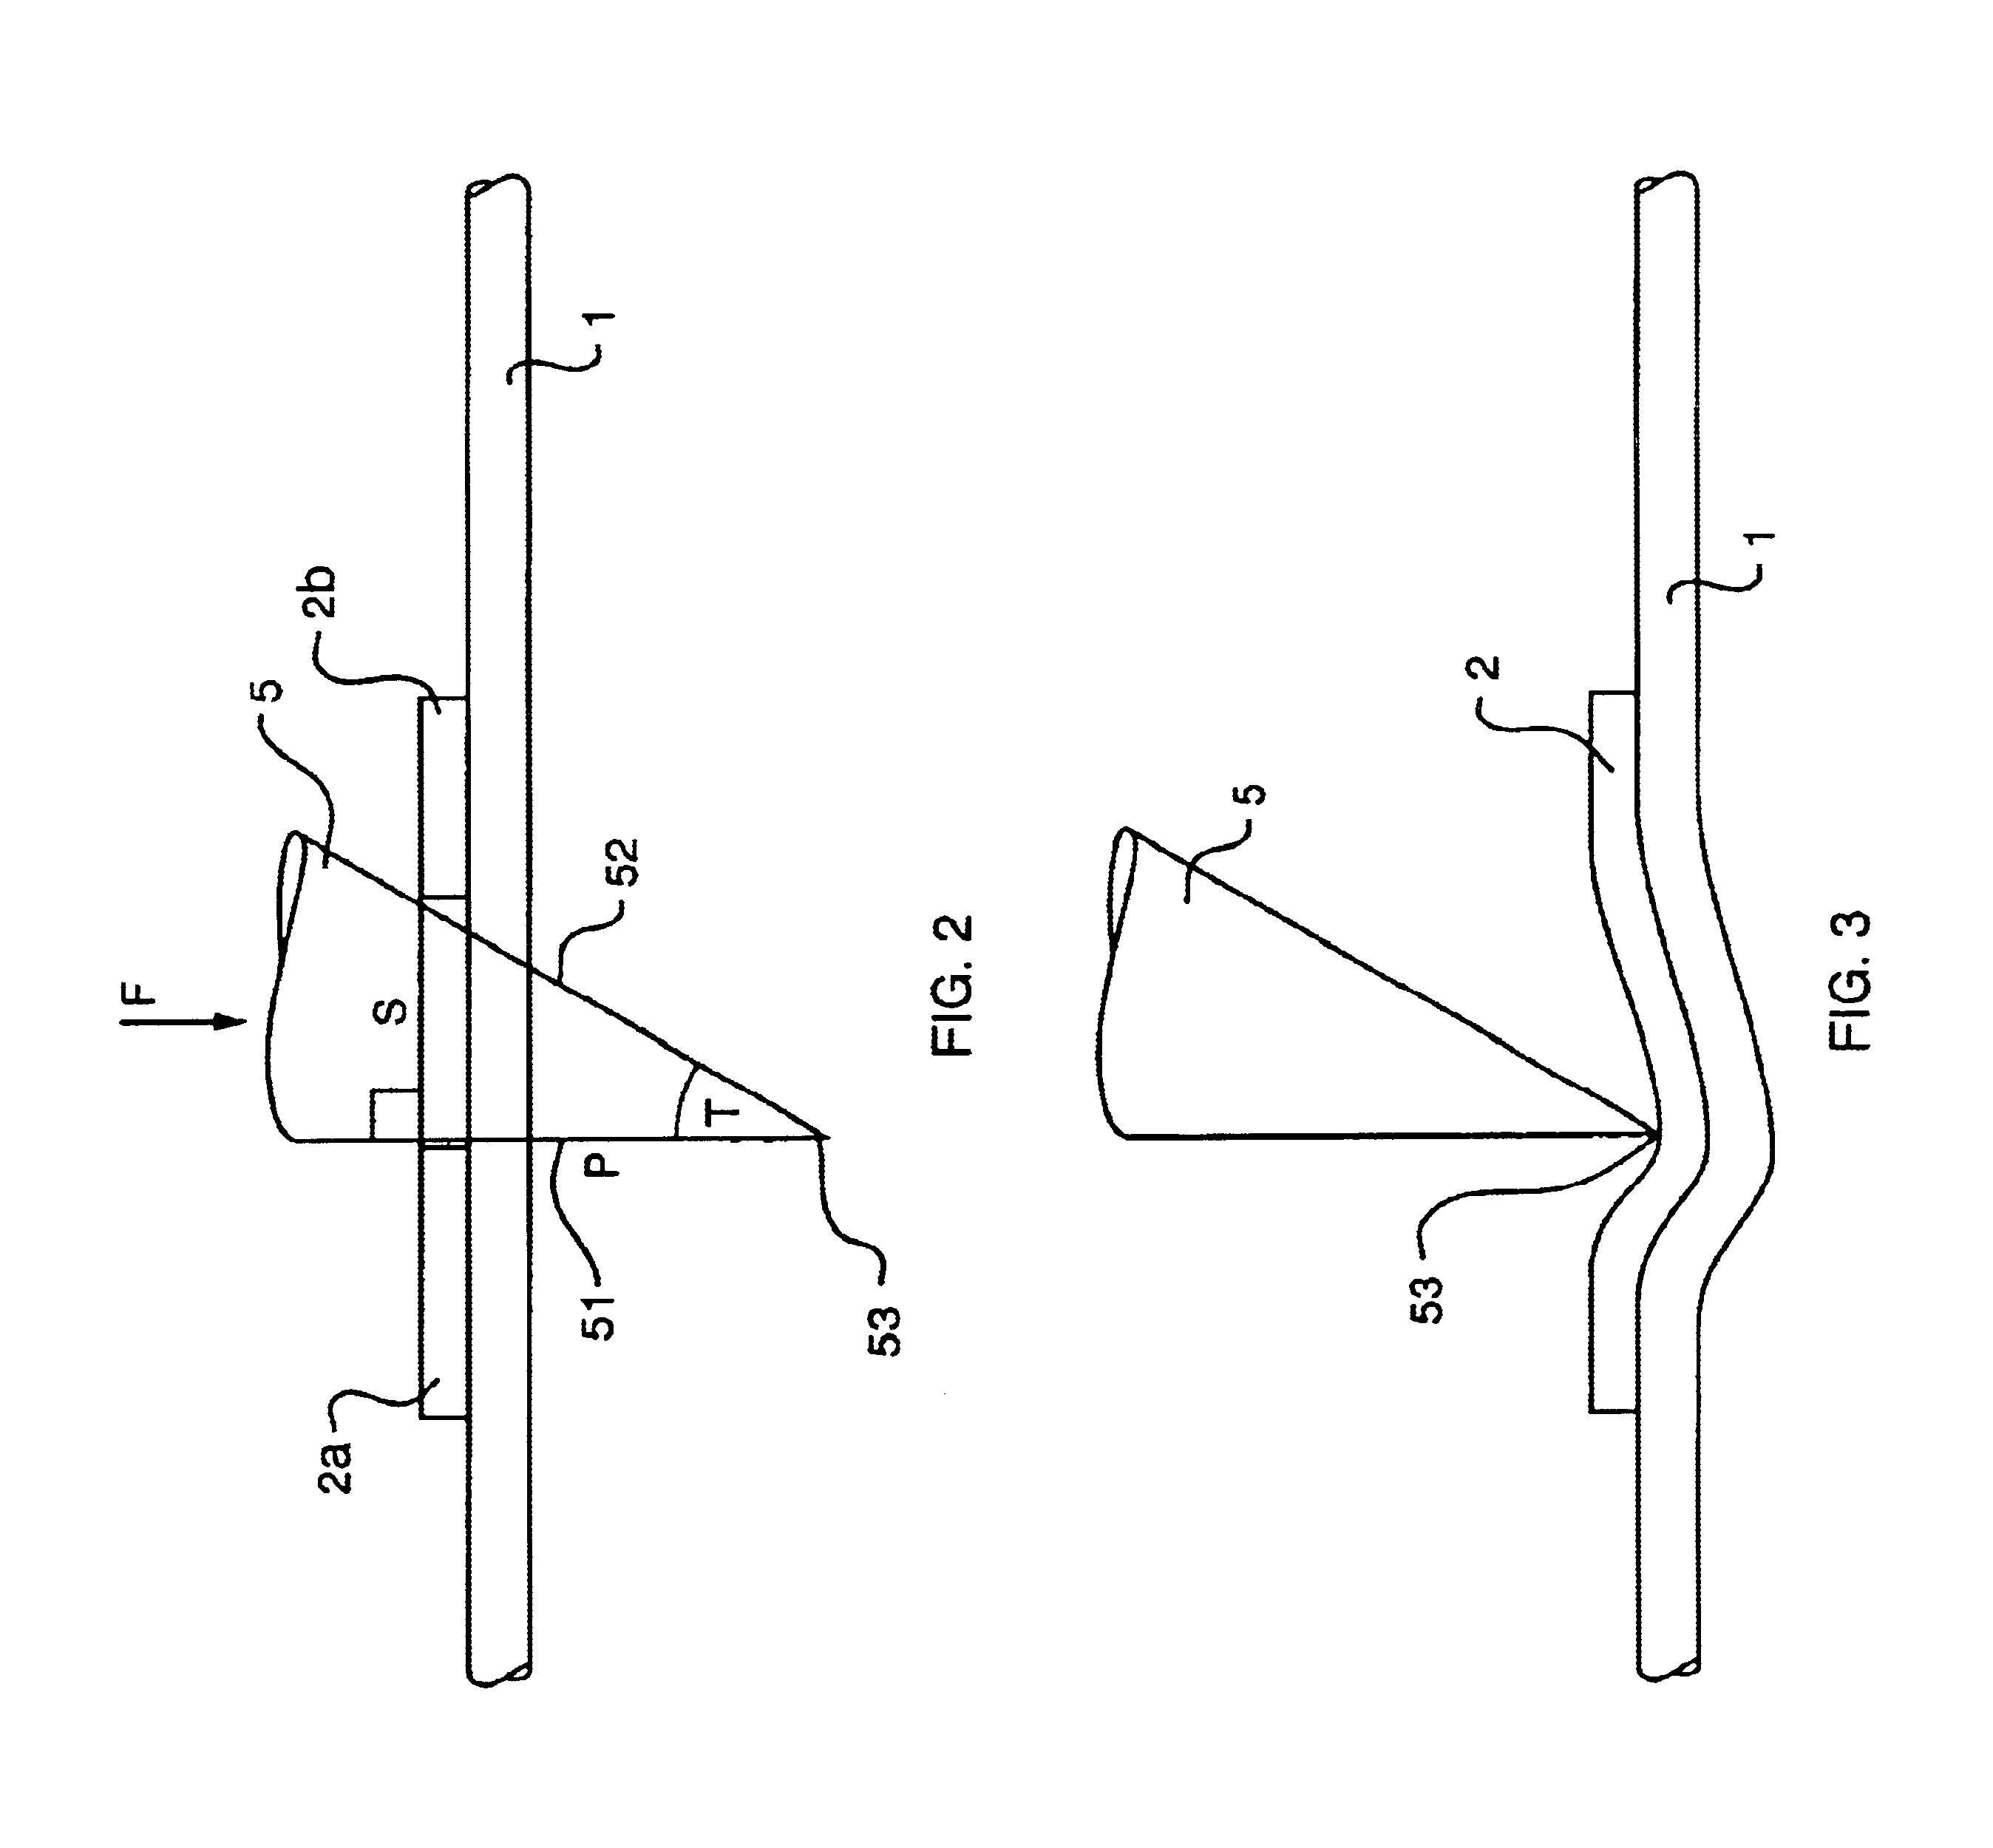 Wearable protective system having protective elements